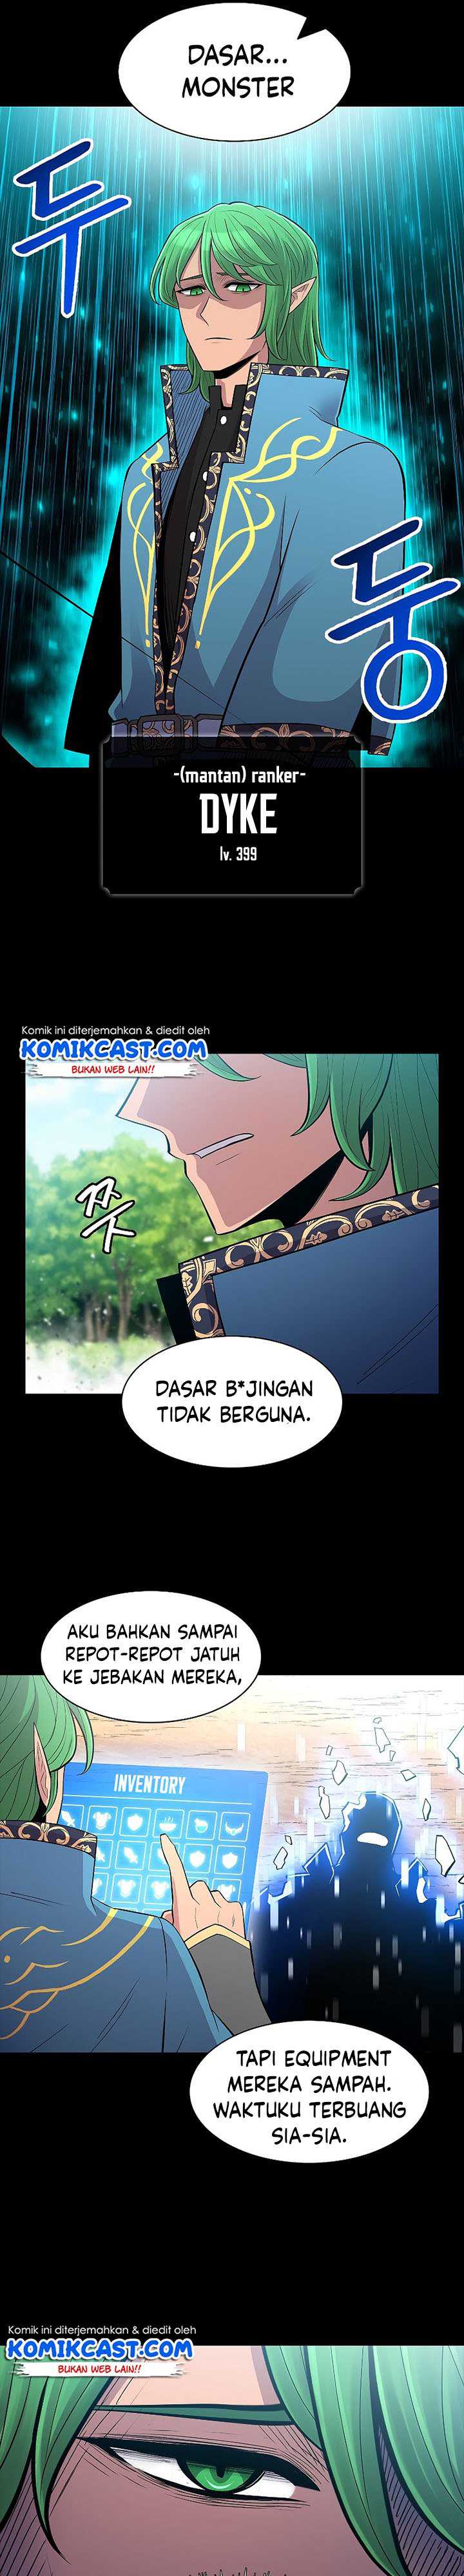 Updater Chapter 70